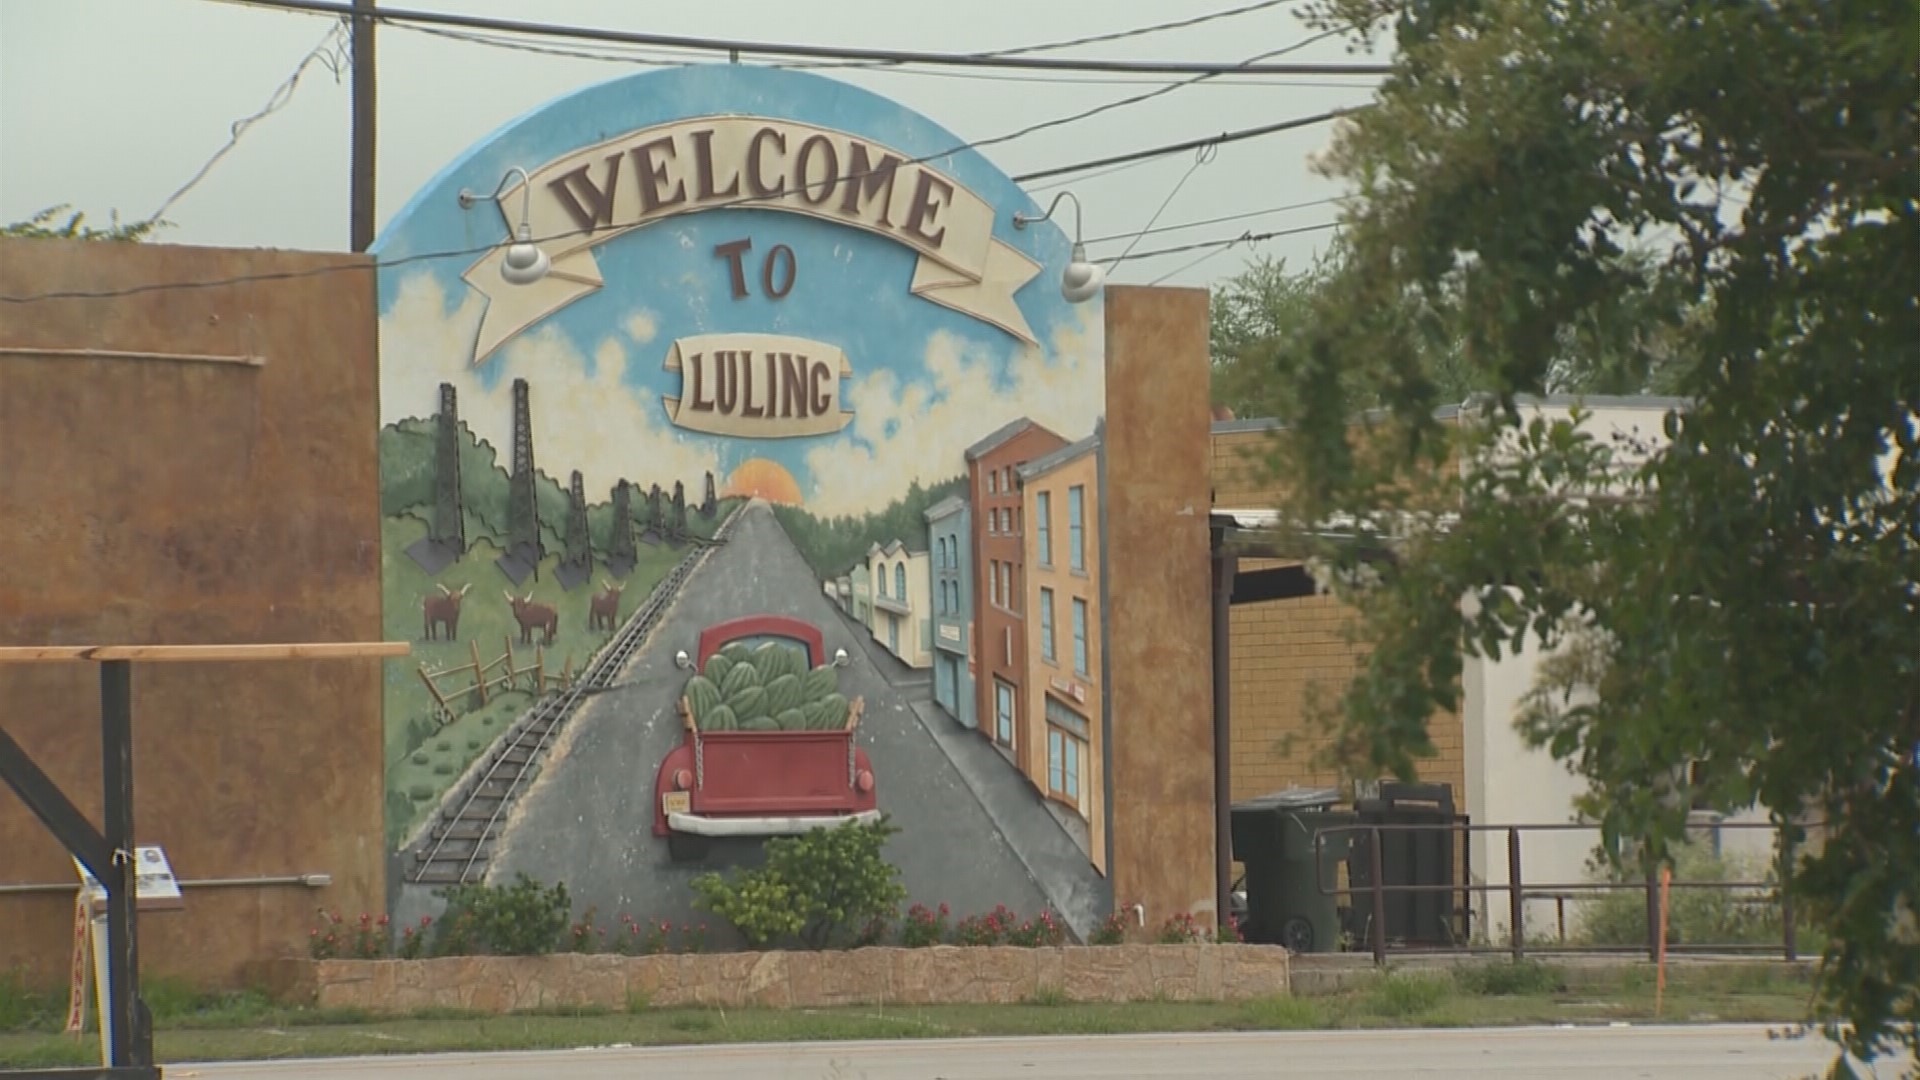 Luling, Texas, is the place to be this weekend. The Watermelon Thump Festival is happening there and it's celebrating all things fruit!